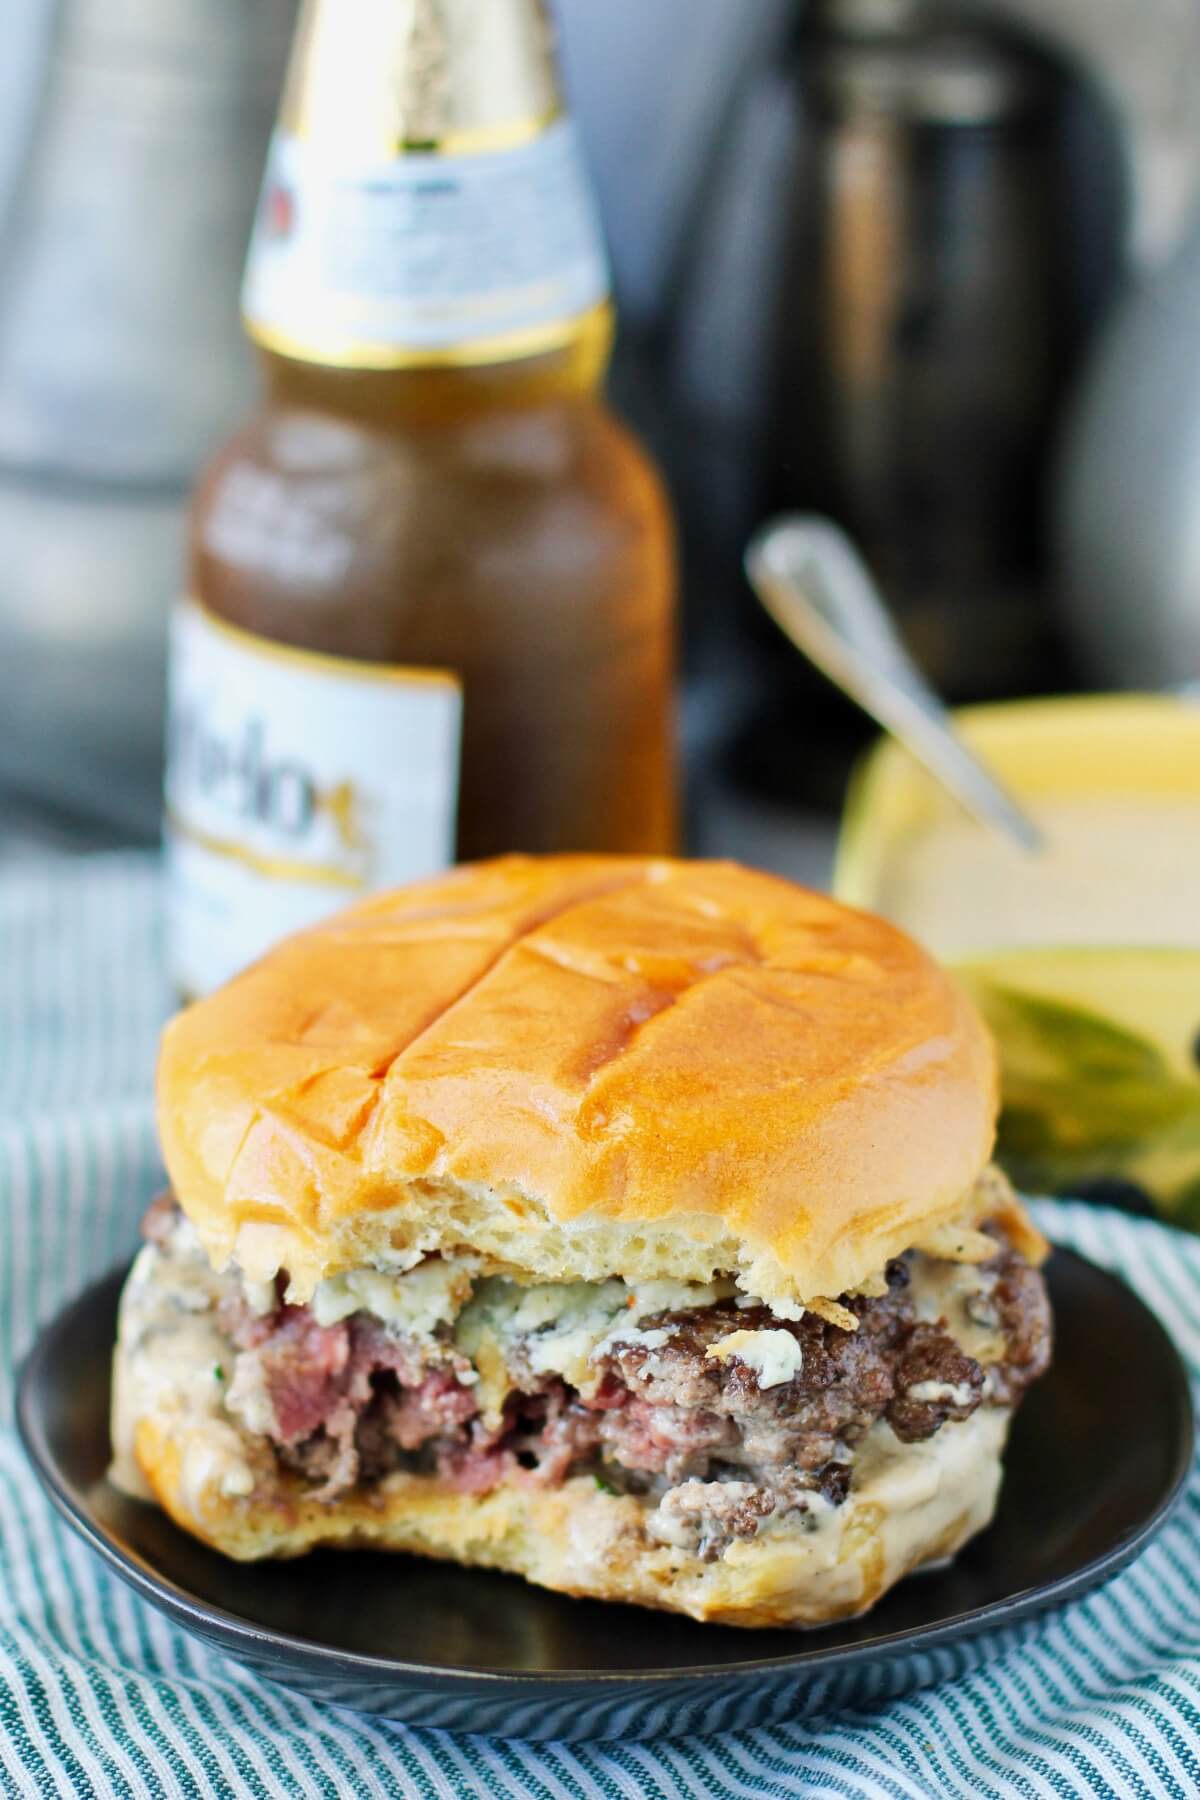 Pub-Style Short Rib Burgers with Gorgonzola, Crispy Fried Shallots, and Secret Sauce with a bite